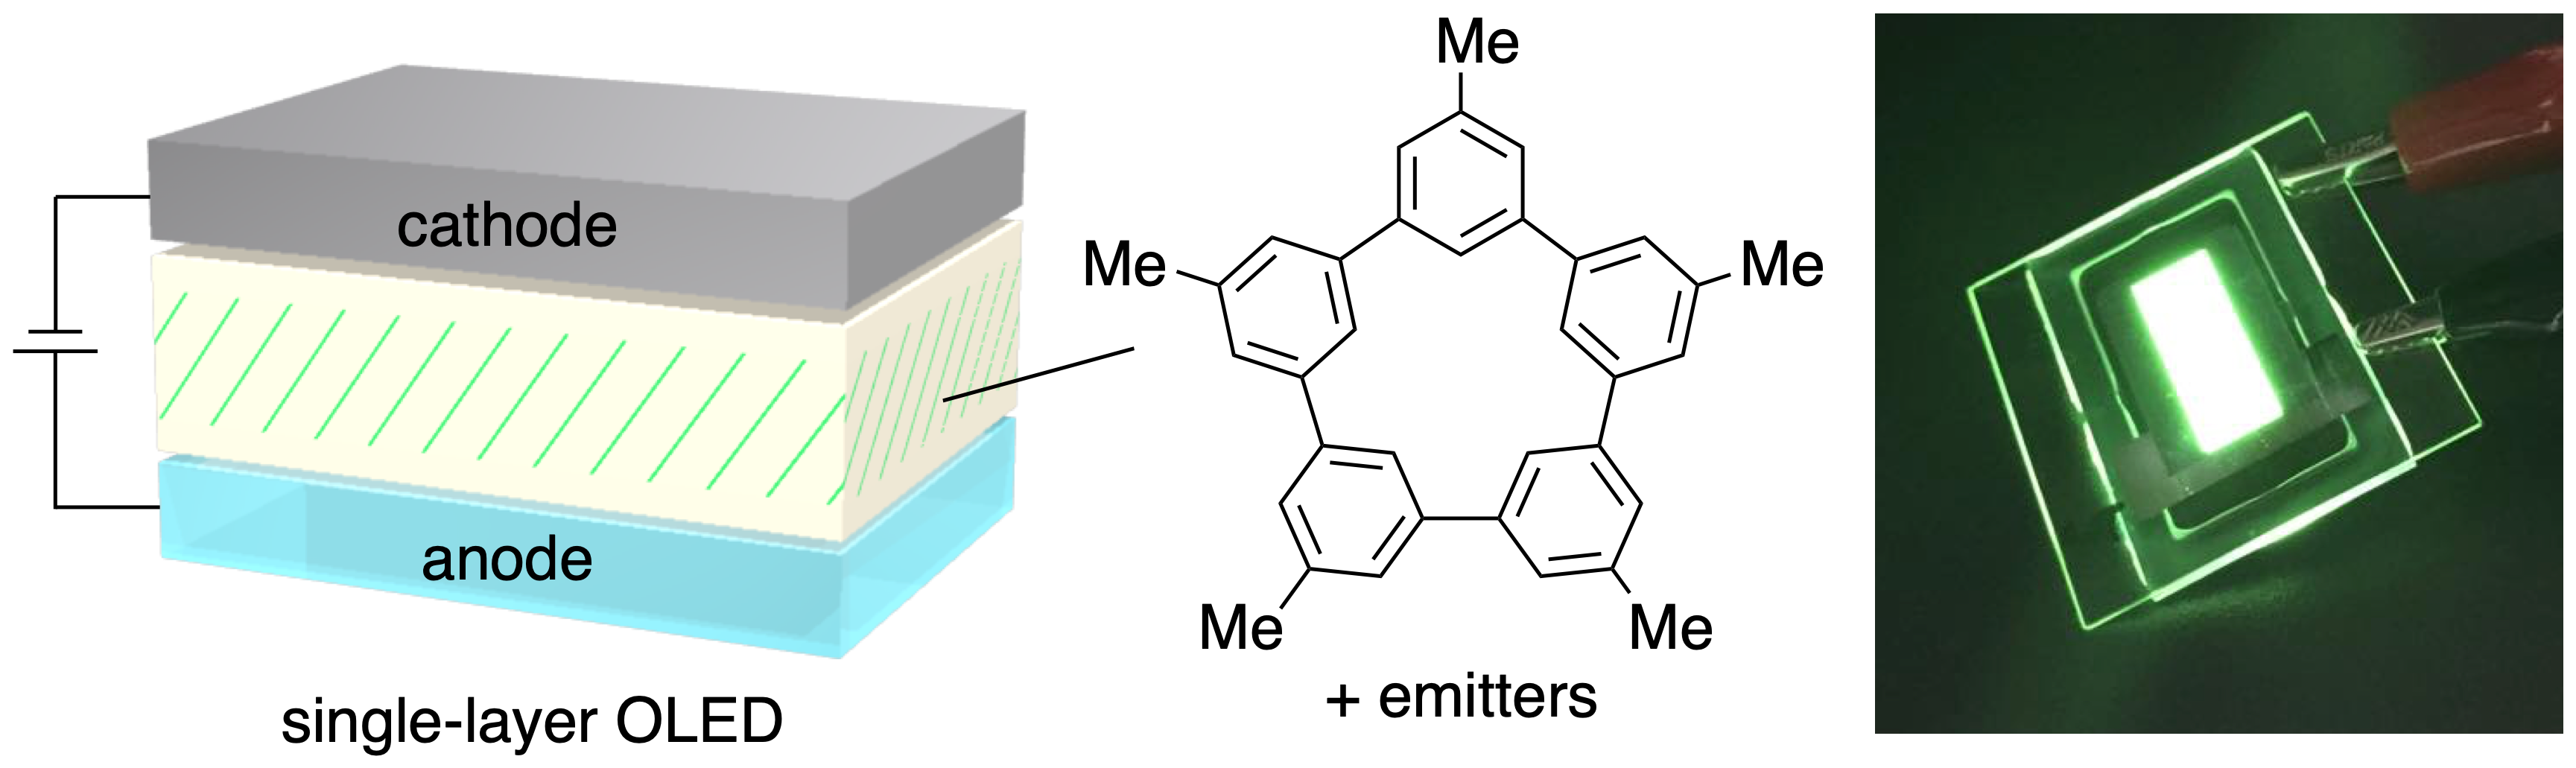 Highly efficient single-layer OLED using a multifunctional aromatic hydrocarbon